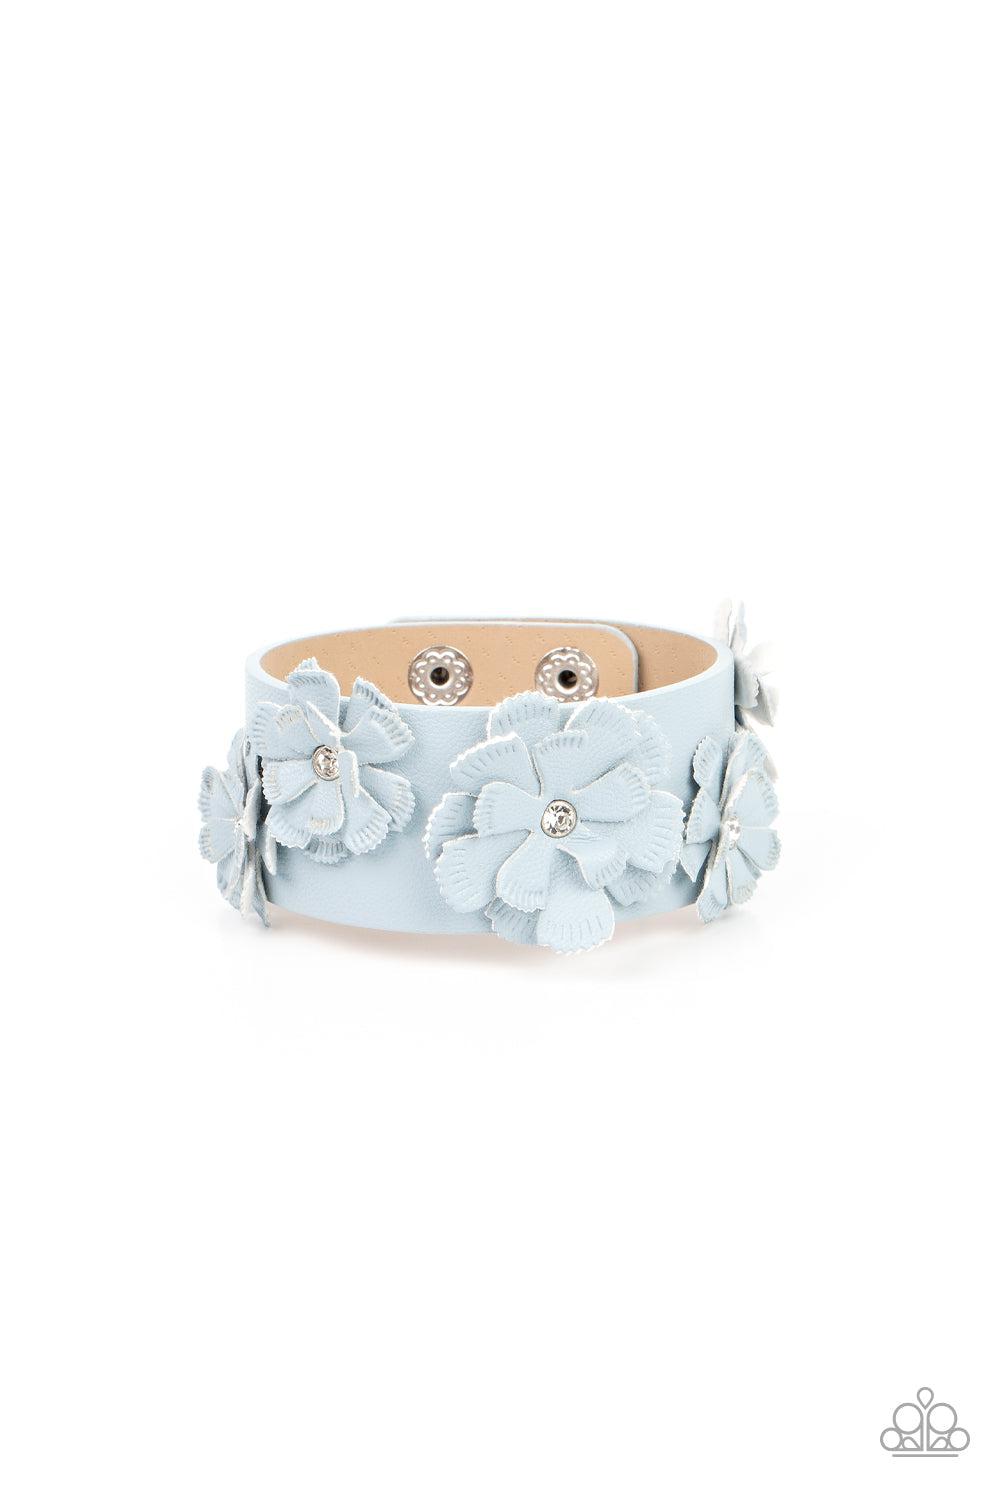 What Do You Pro-POSIES Blue Leather Wrap Snap Bracelet - Paparazzi Accessories- lightbox - CarasShop.com - $5 Jewelry by Cara Jewels